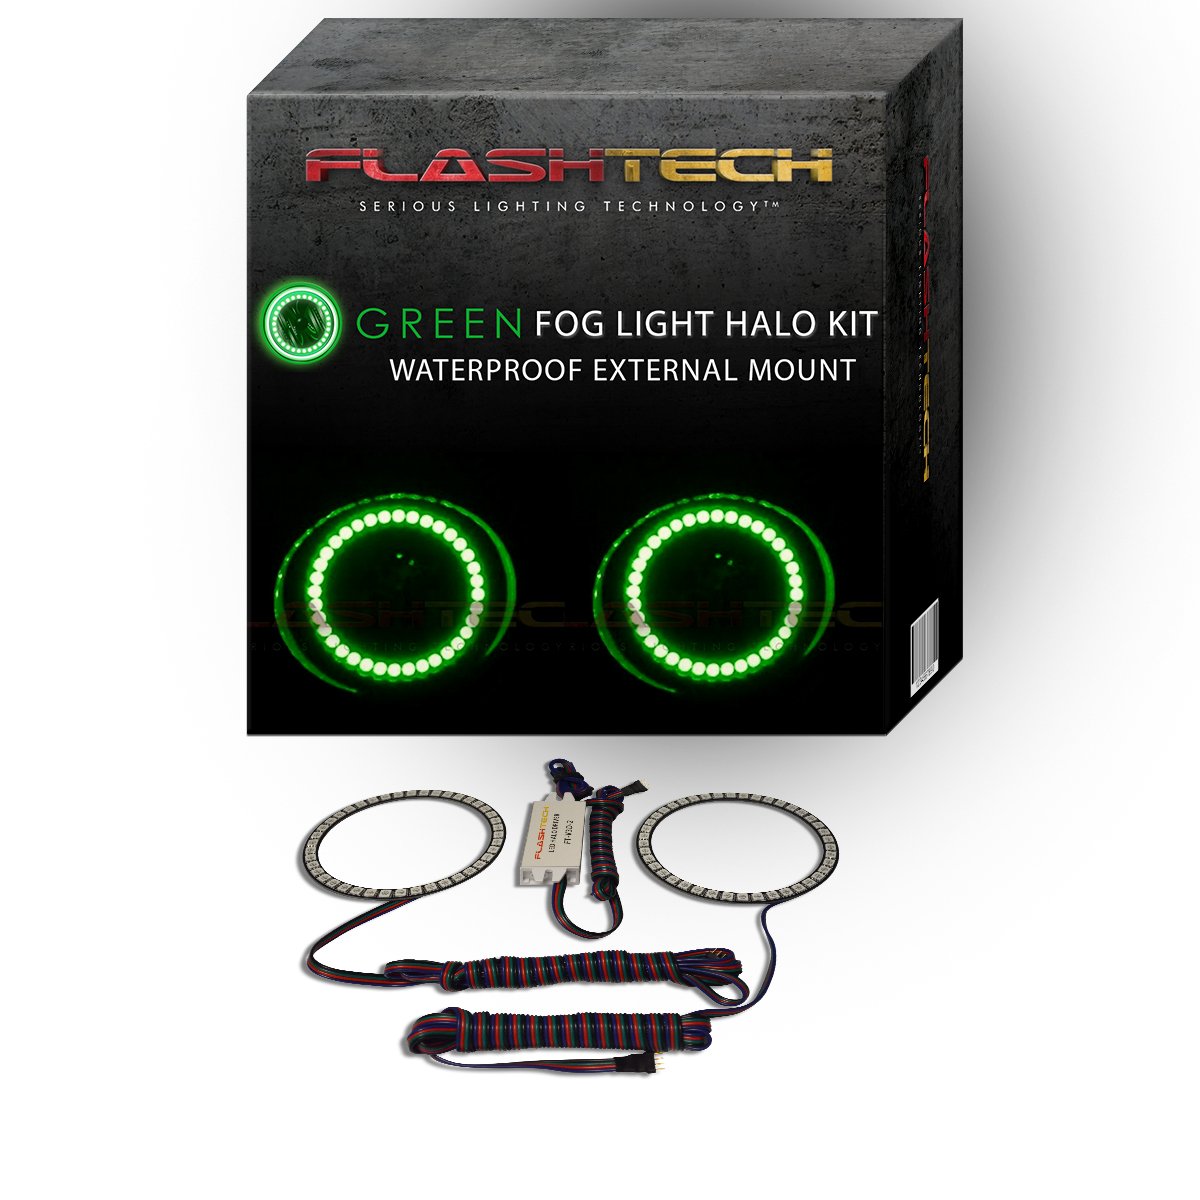 Chrysler-Town & Country-2005, 2006, 2007, 2008, 2009, 2010-LED-Halo-Fog Lights-Green-No Remote-CH-TC0510-GF-WPE